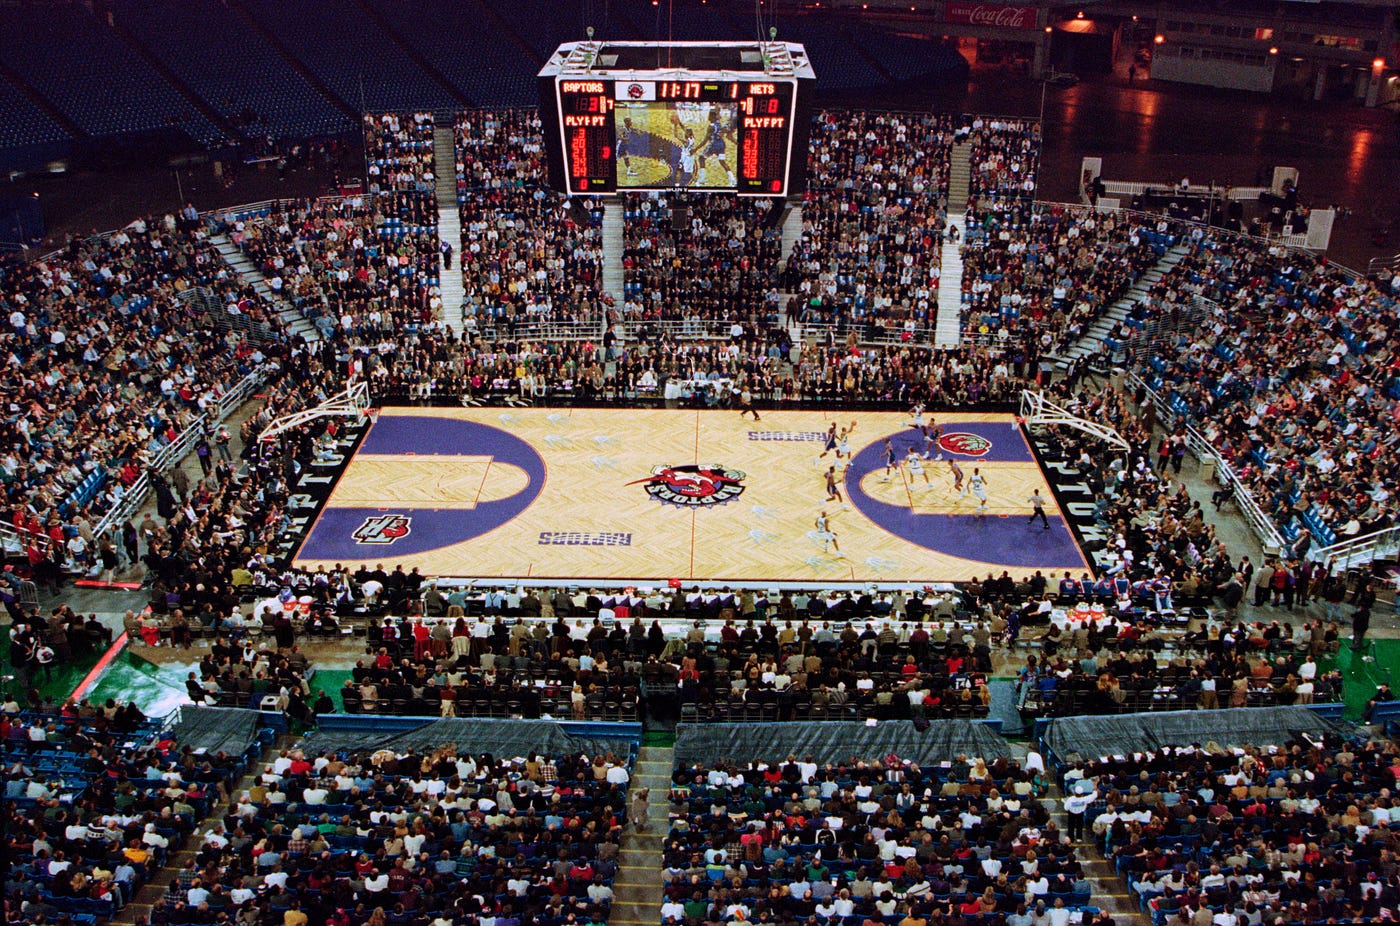 I designed some new jerseys and courts if the Raptors were to go